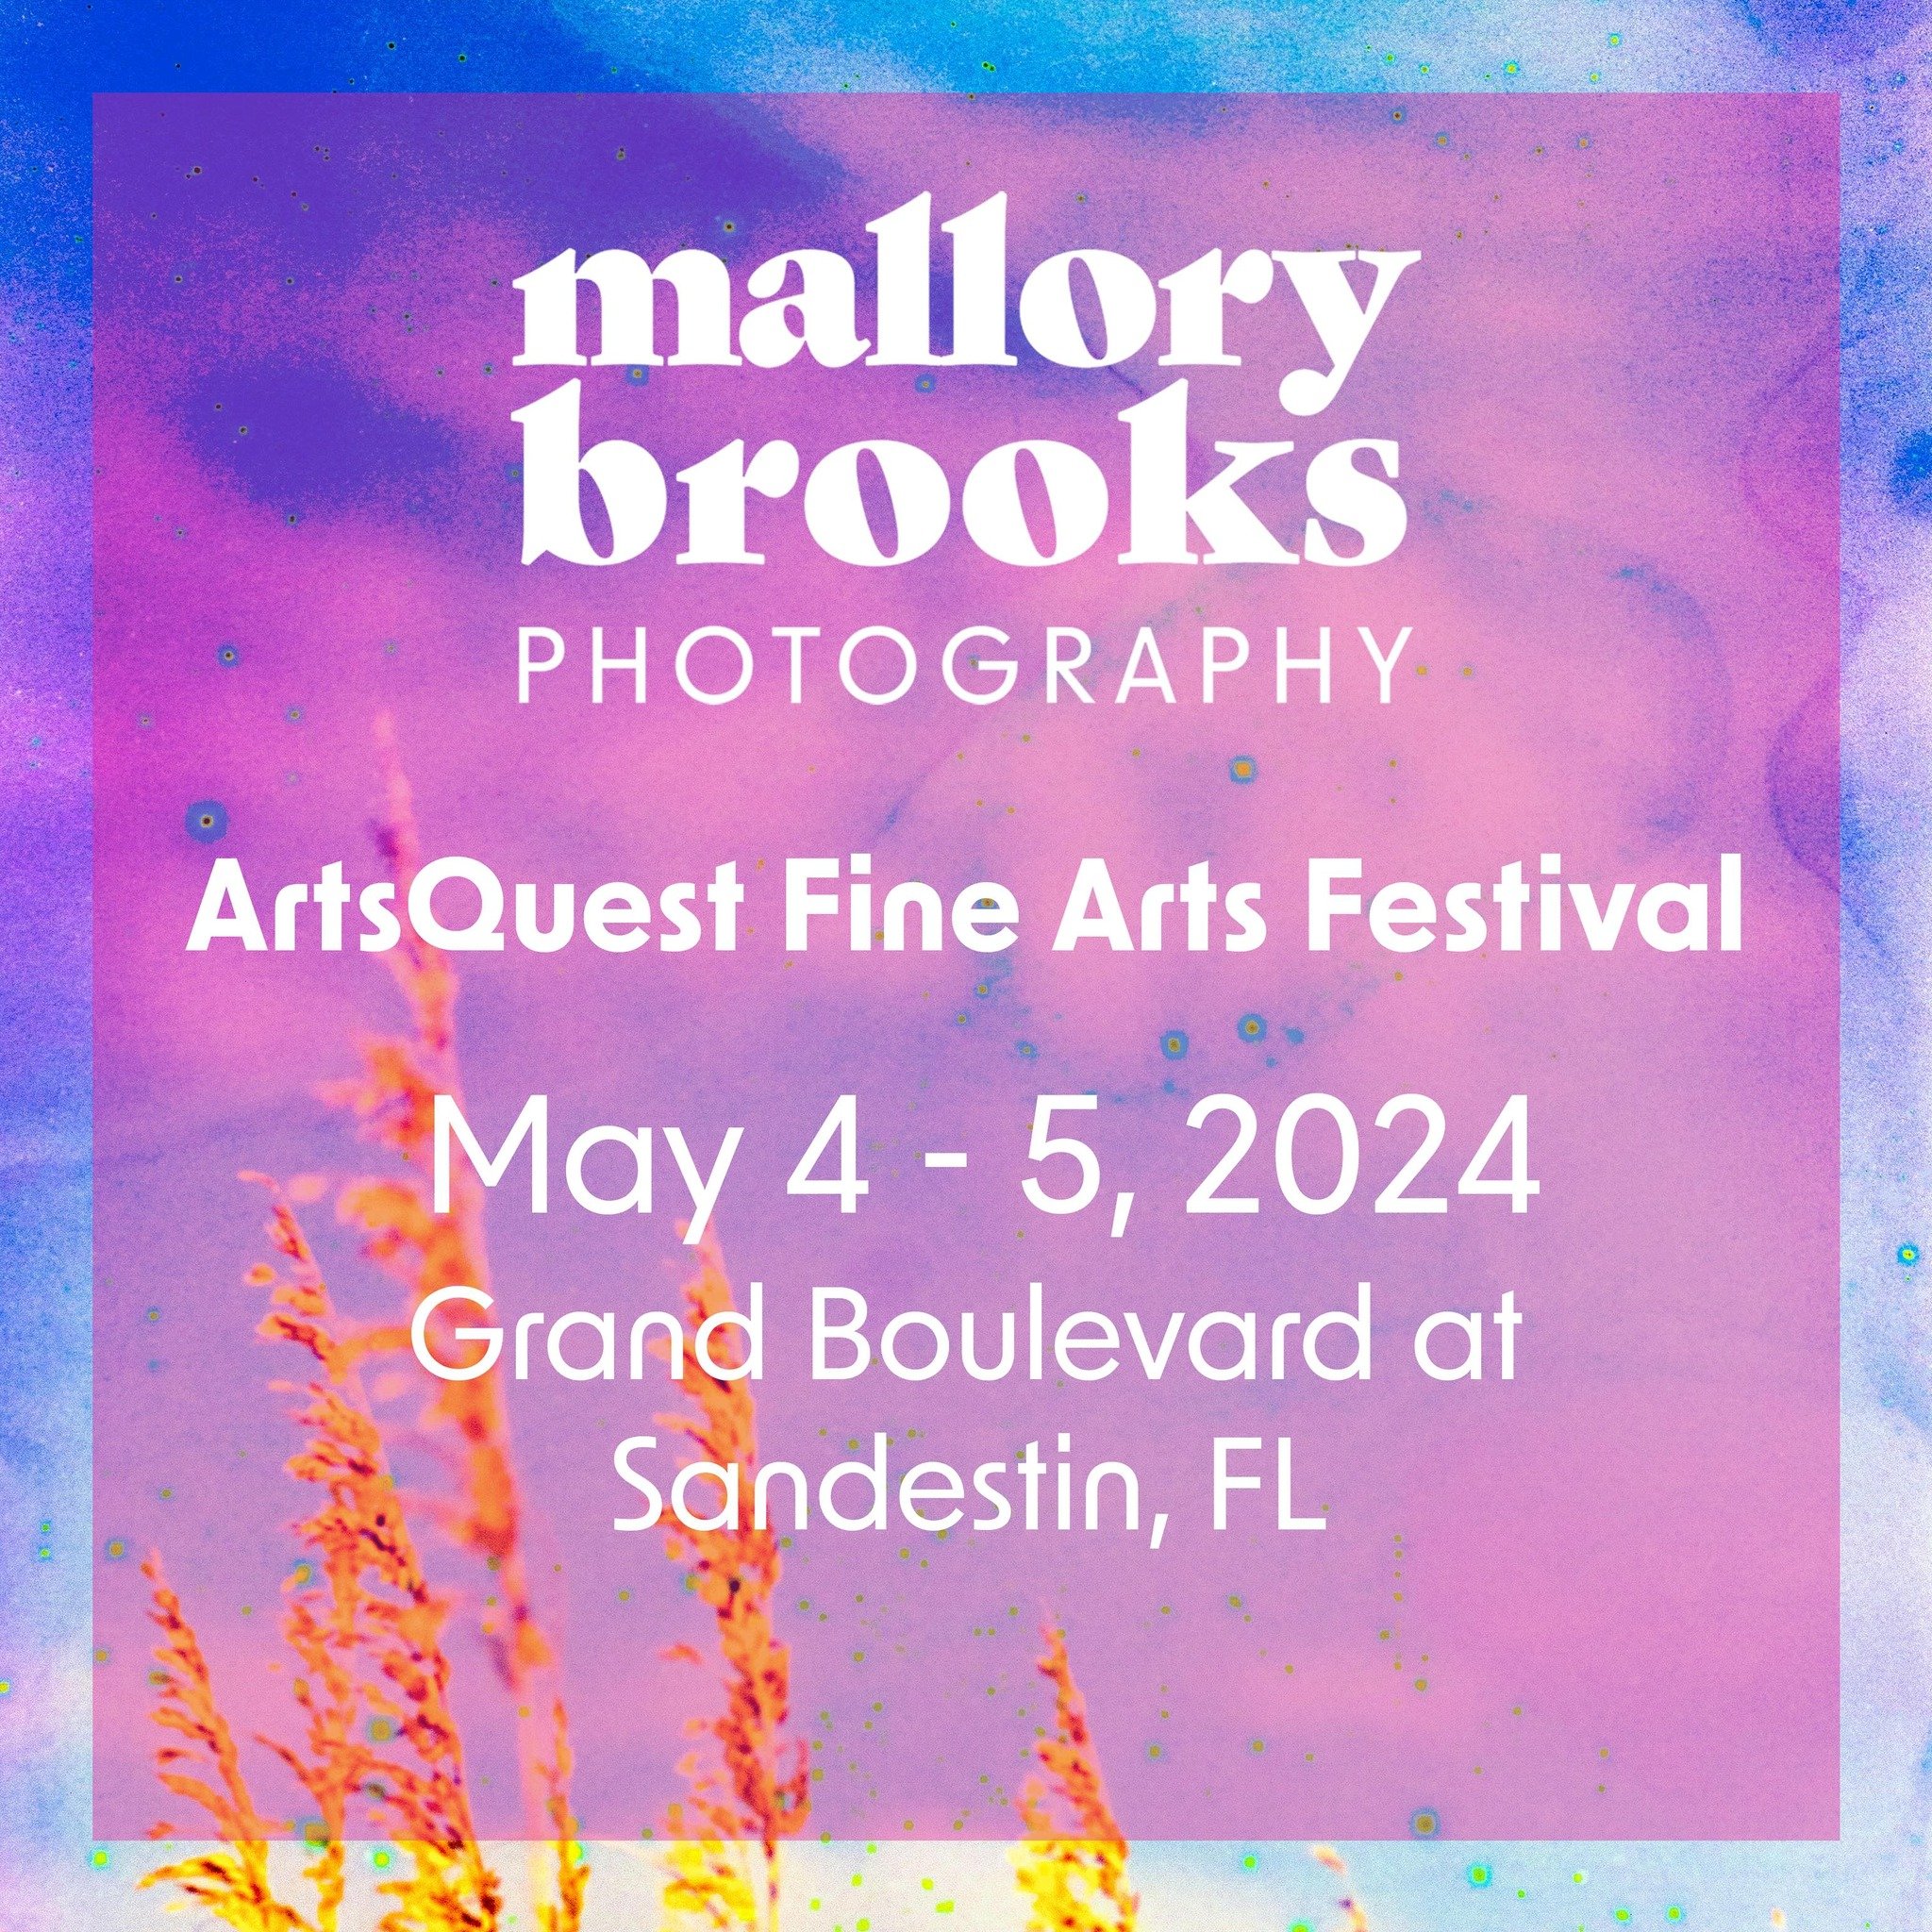 Coming off a wonderful weekend at @inmanparkfest into prep for this weekend&rsquo;s ArtsQuest Fine Arts Festival in Destin! Thank you so much to everyone who stopped by to browse or shop, I enjoyed sharing my art with so many new and familiar faces :